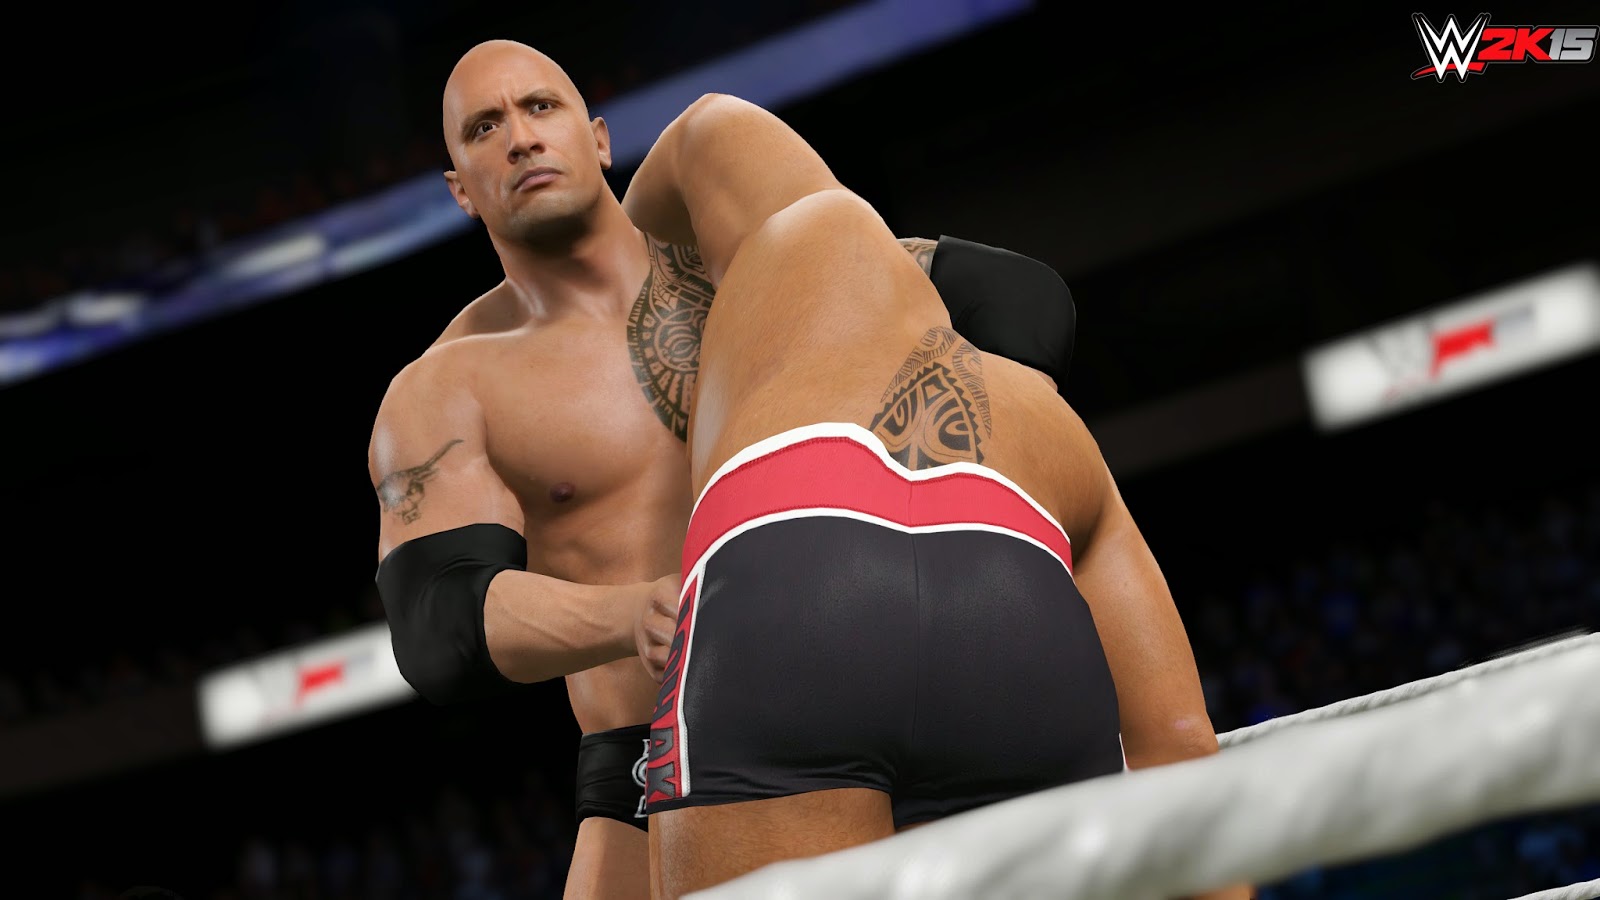 ... Software Arrived: WWE 2K 15 Game Download For Windows | WWE Game